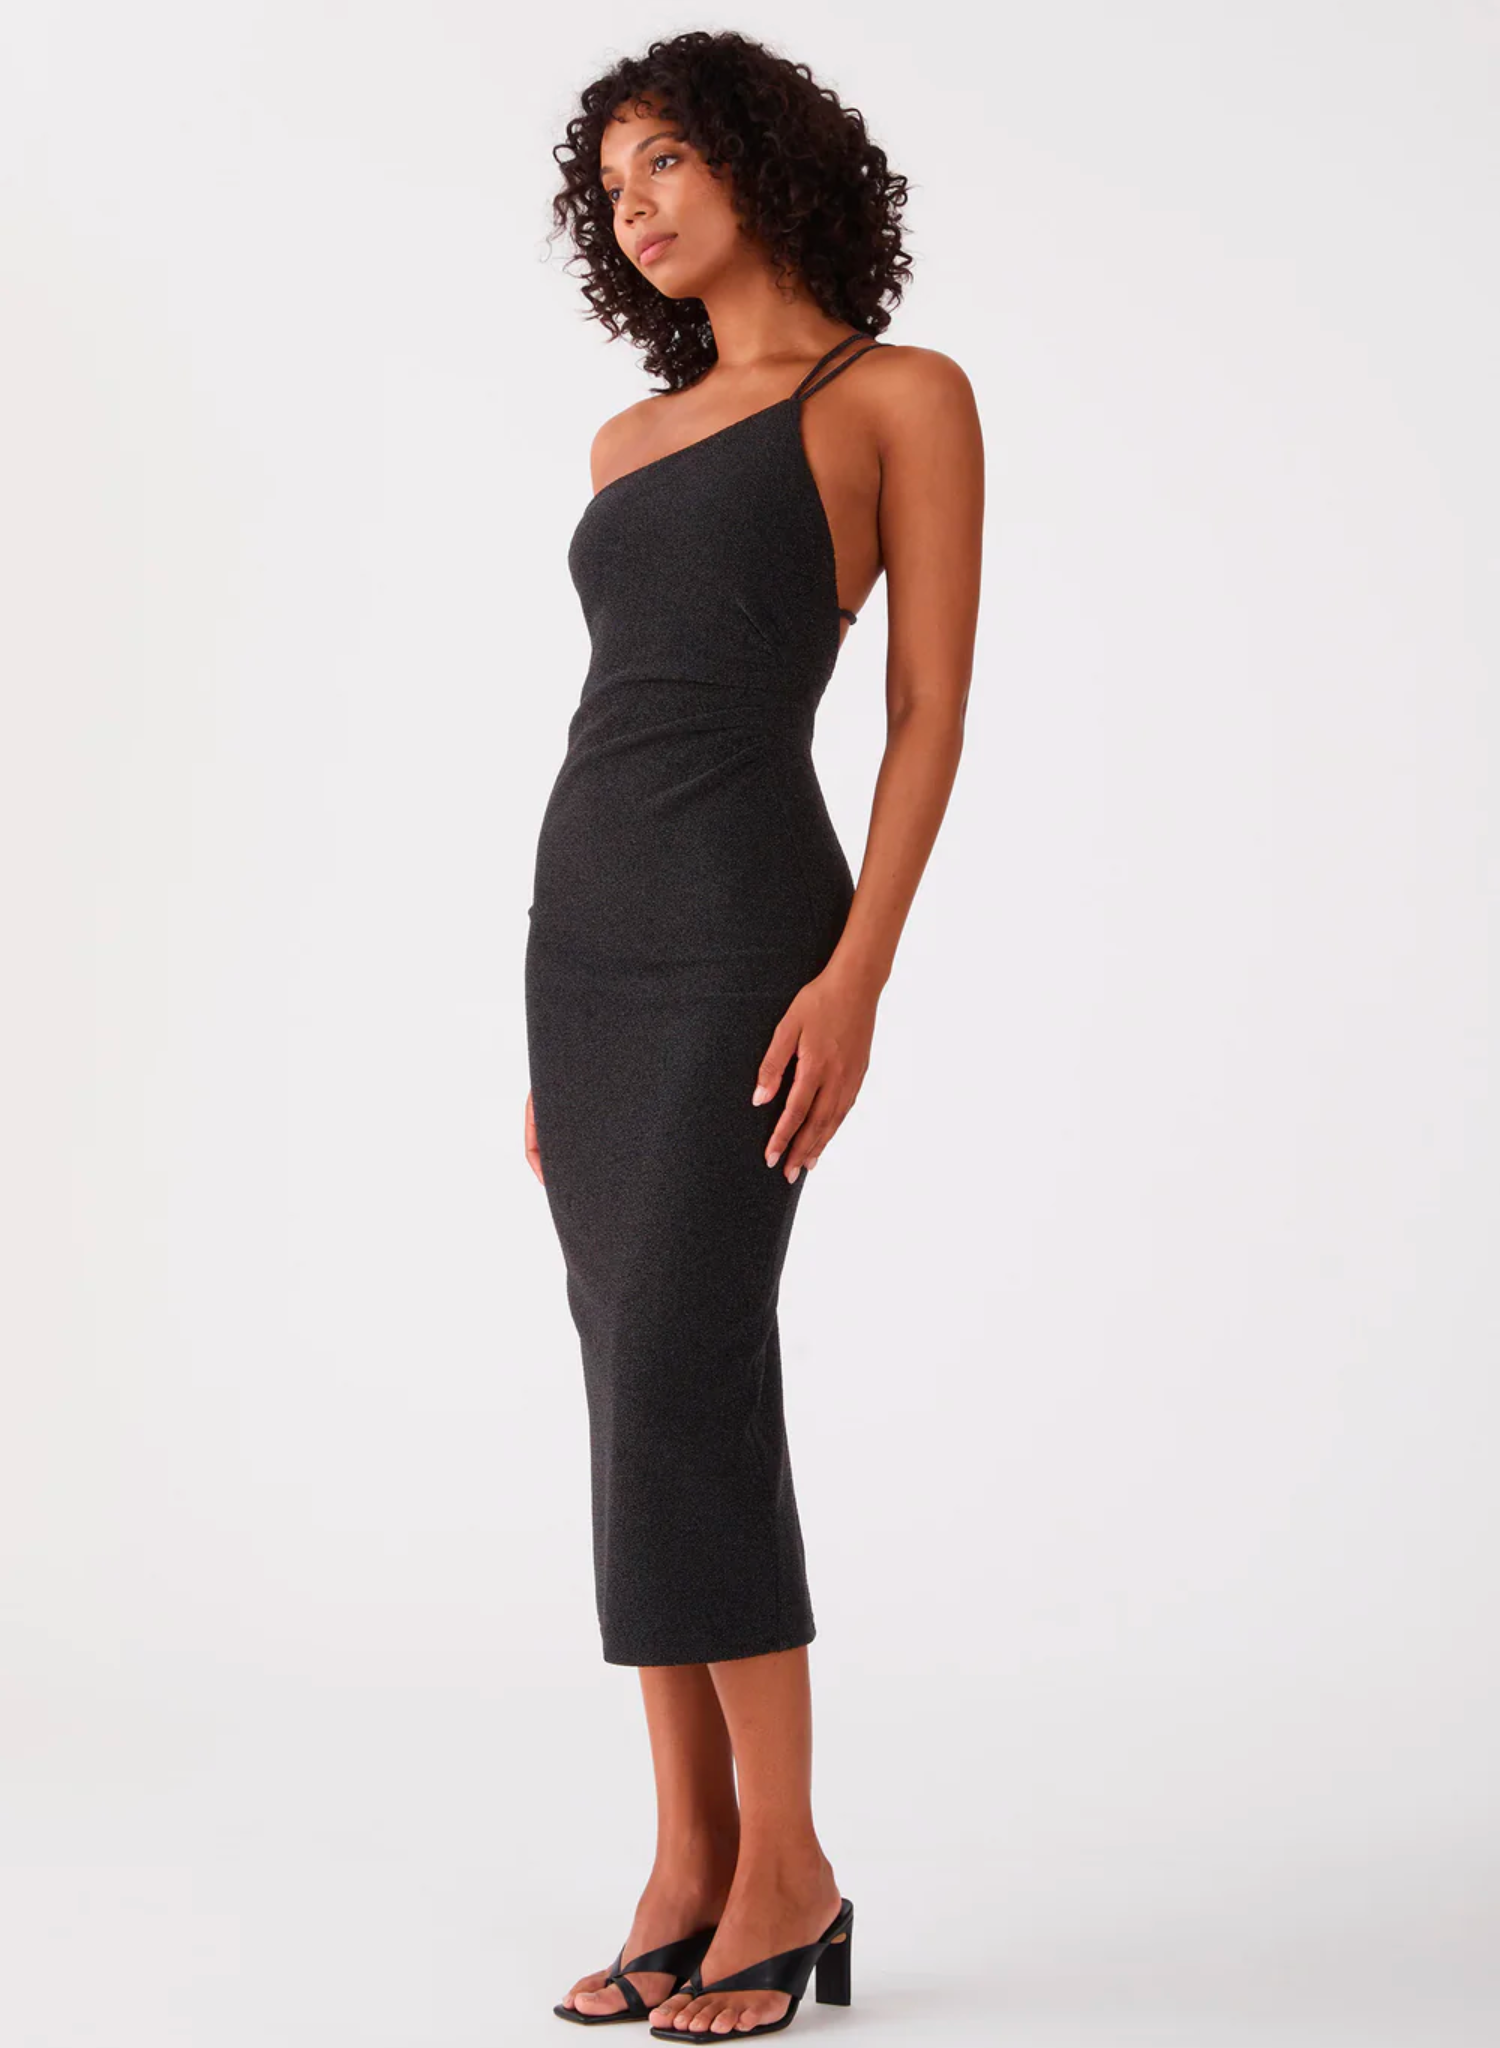 Get ready to sparkle in the San Sloane Golda Midi Dress! This show-stopping dress is crafted in a sparkle metallic jersey and fully lined for a perfect fit. Featuring an asymmetric neckline, gathers at the waist and adjustable strap detailing, you'll be turning heads in this bodycon midi with its low scoop back and stretch fabric. 